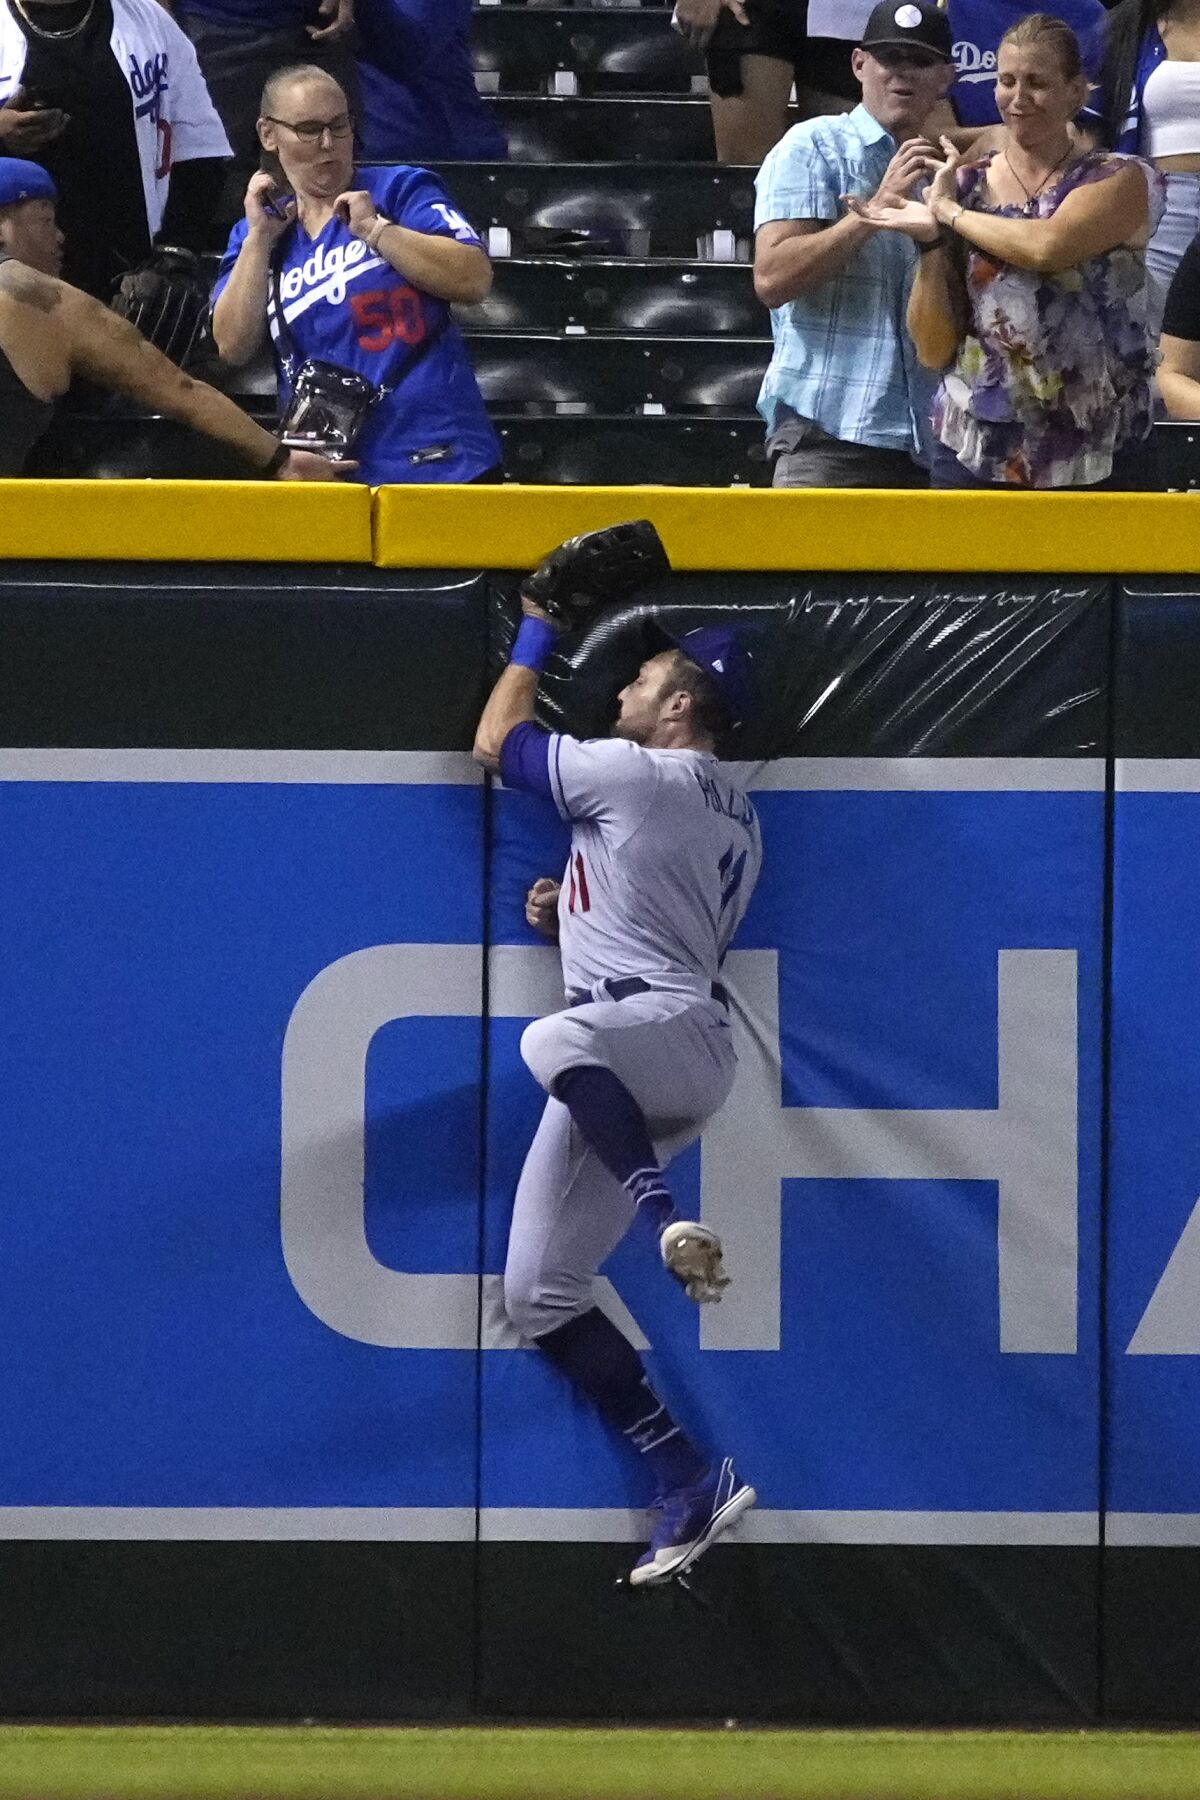 Dodgers left fielder AJ Pollock runs into the outfield wall while making a catch.